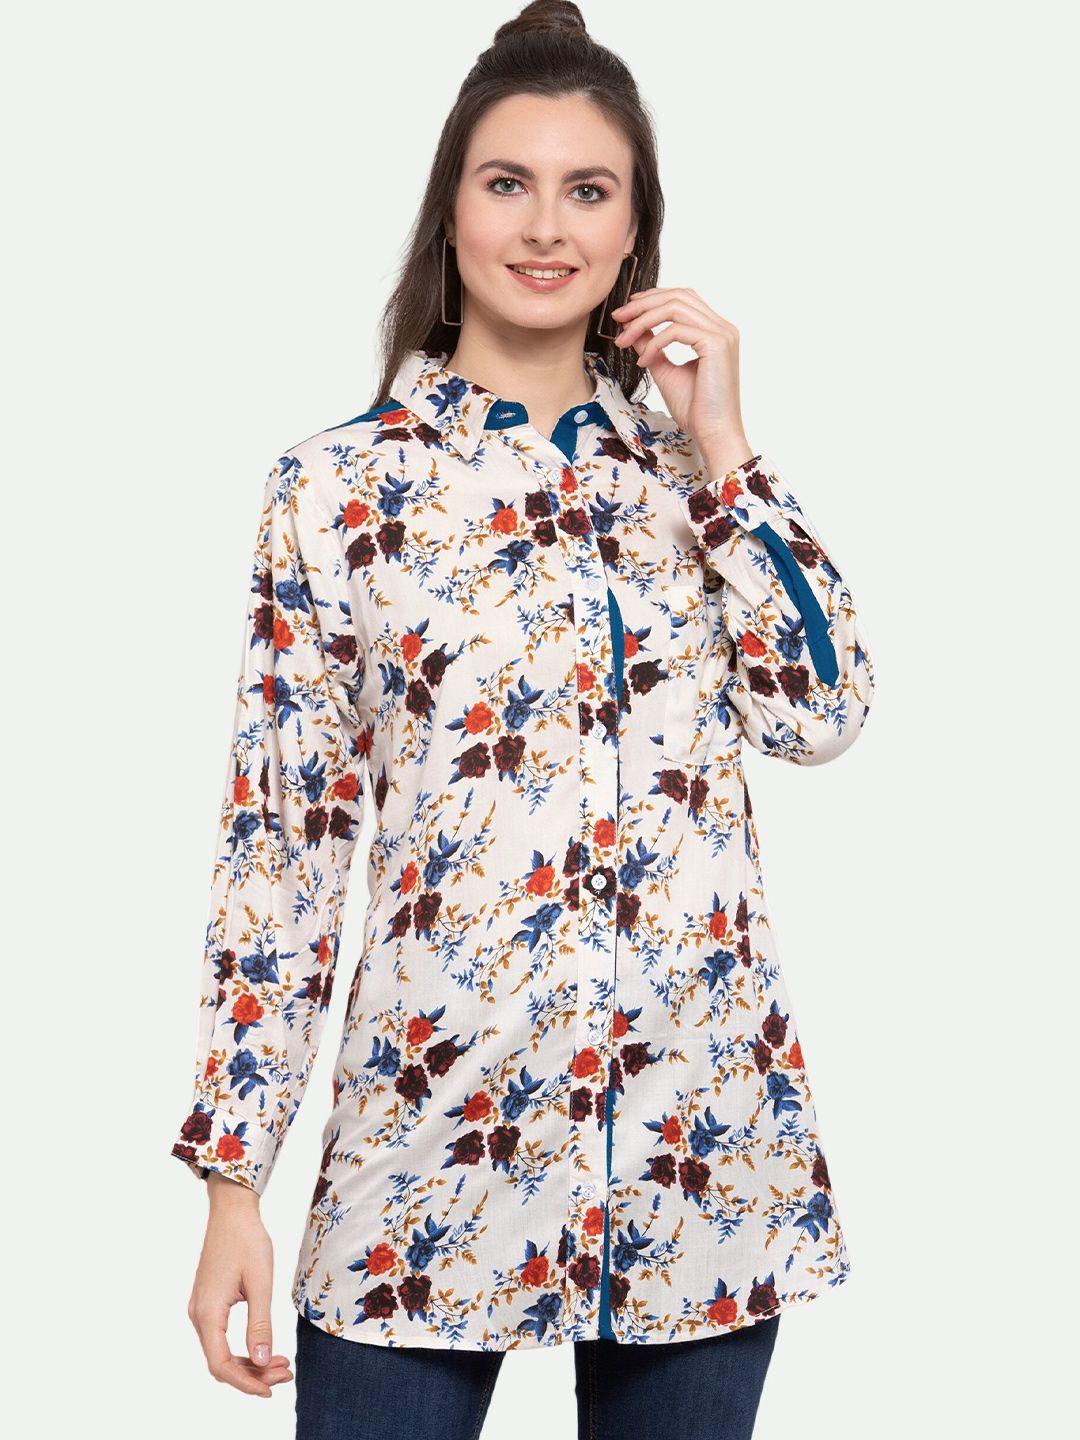 patrorna women off white comfort floral printed casual shirt